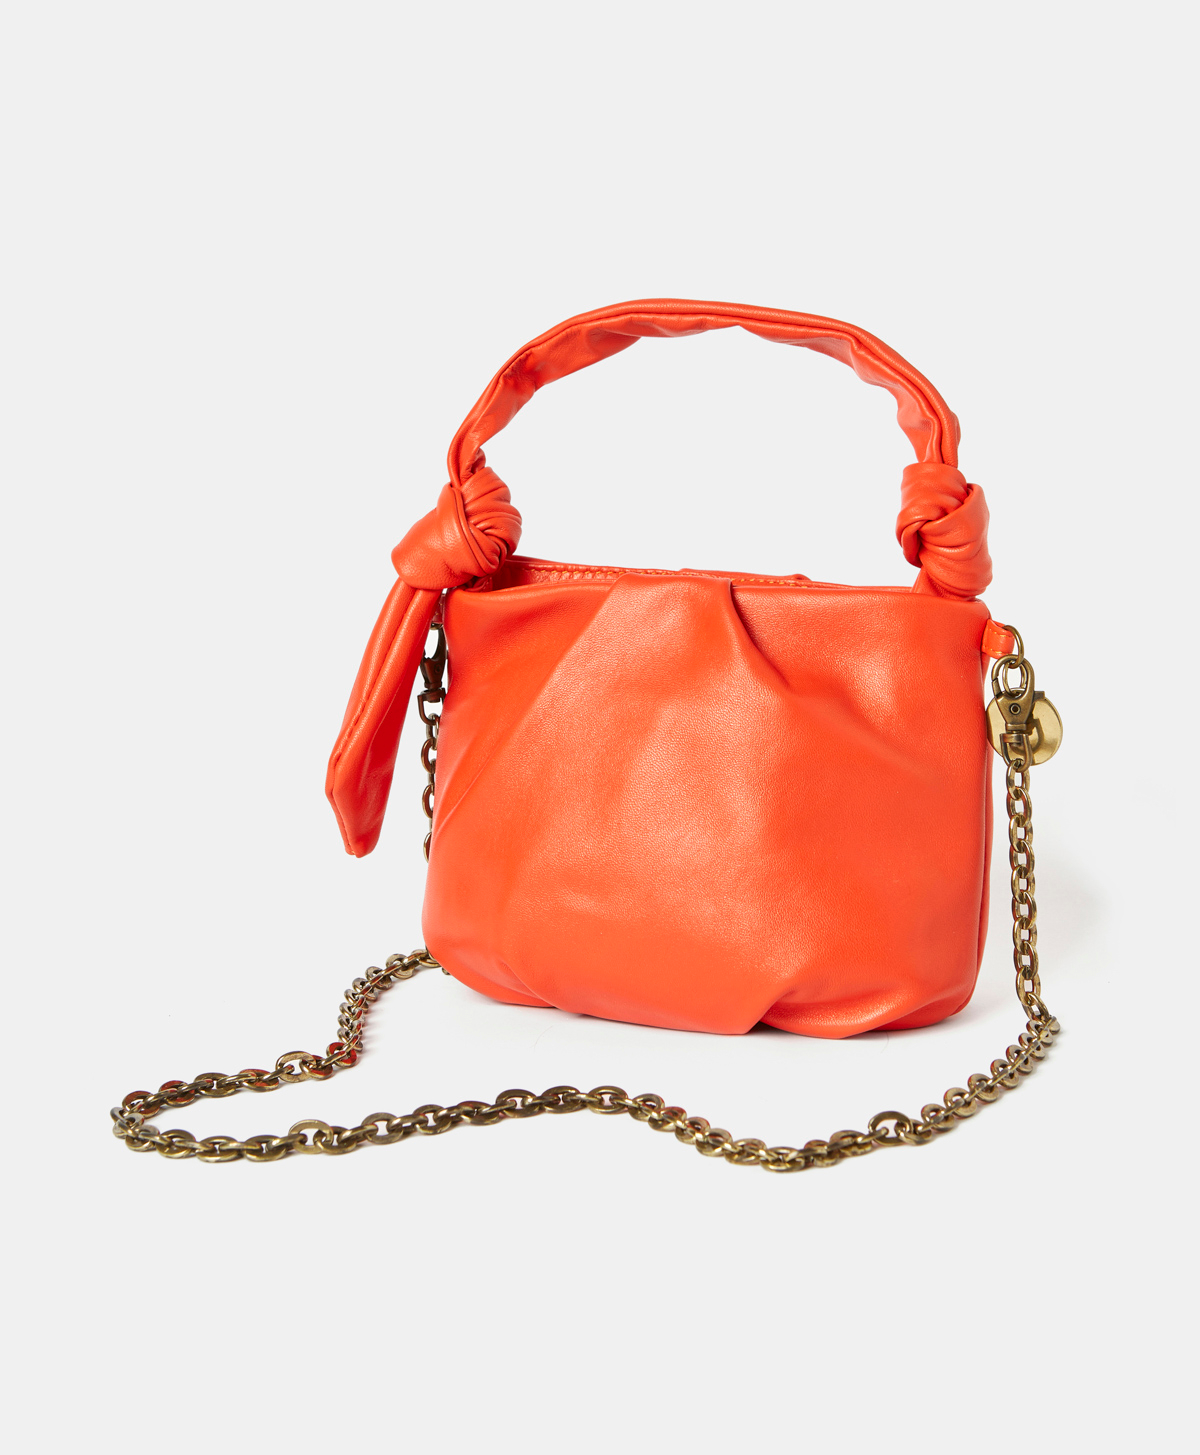 PETIT MADELEINE BAG IN NAPPA LEATHER - CORAL - Momonì